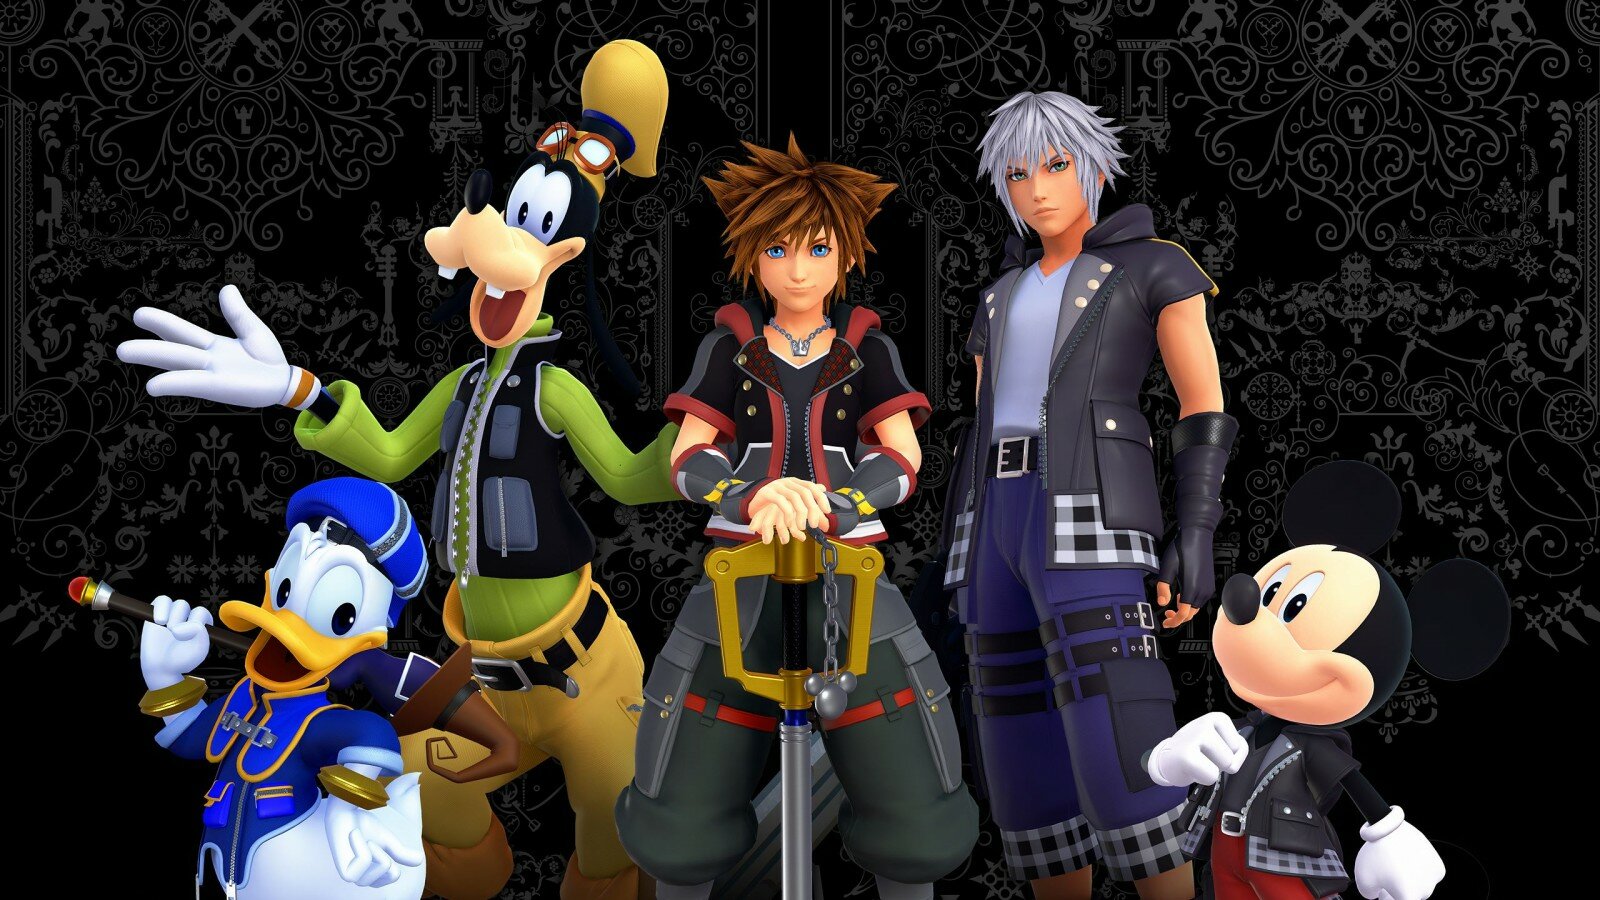 the best kingdom hearts games ranked, best kingdom hearts, series, ranking, kingdom hearts 2, kingdom hearts 3, birth by sleep